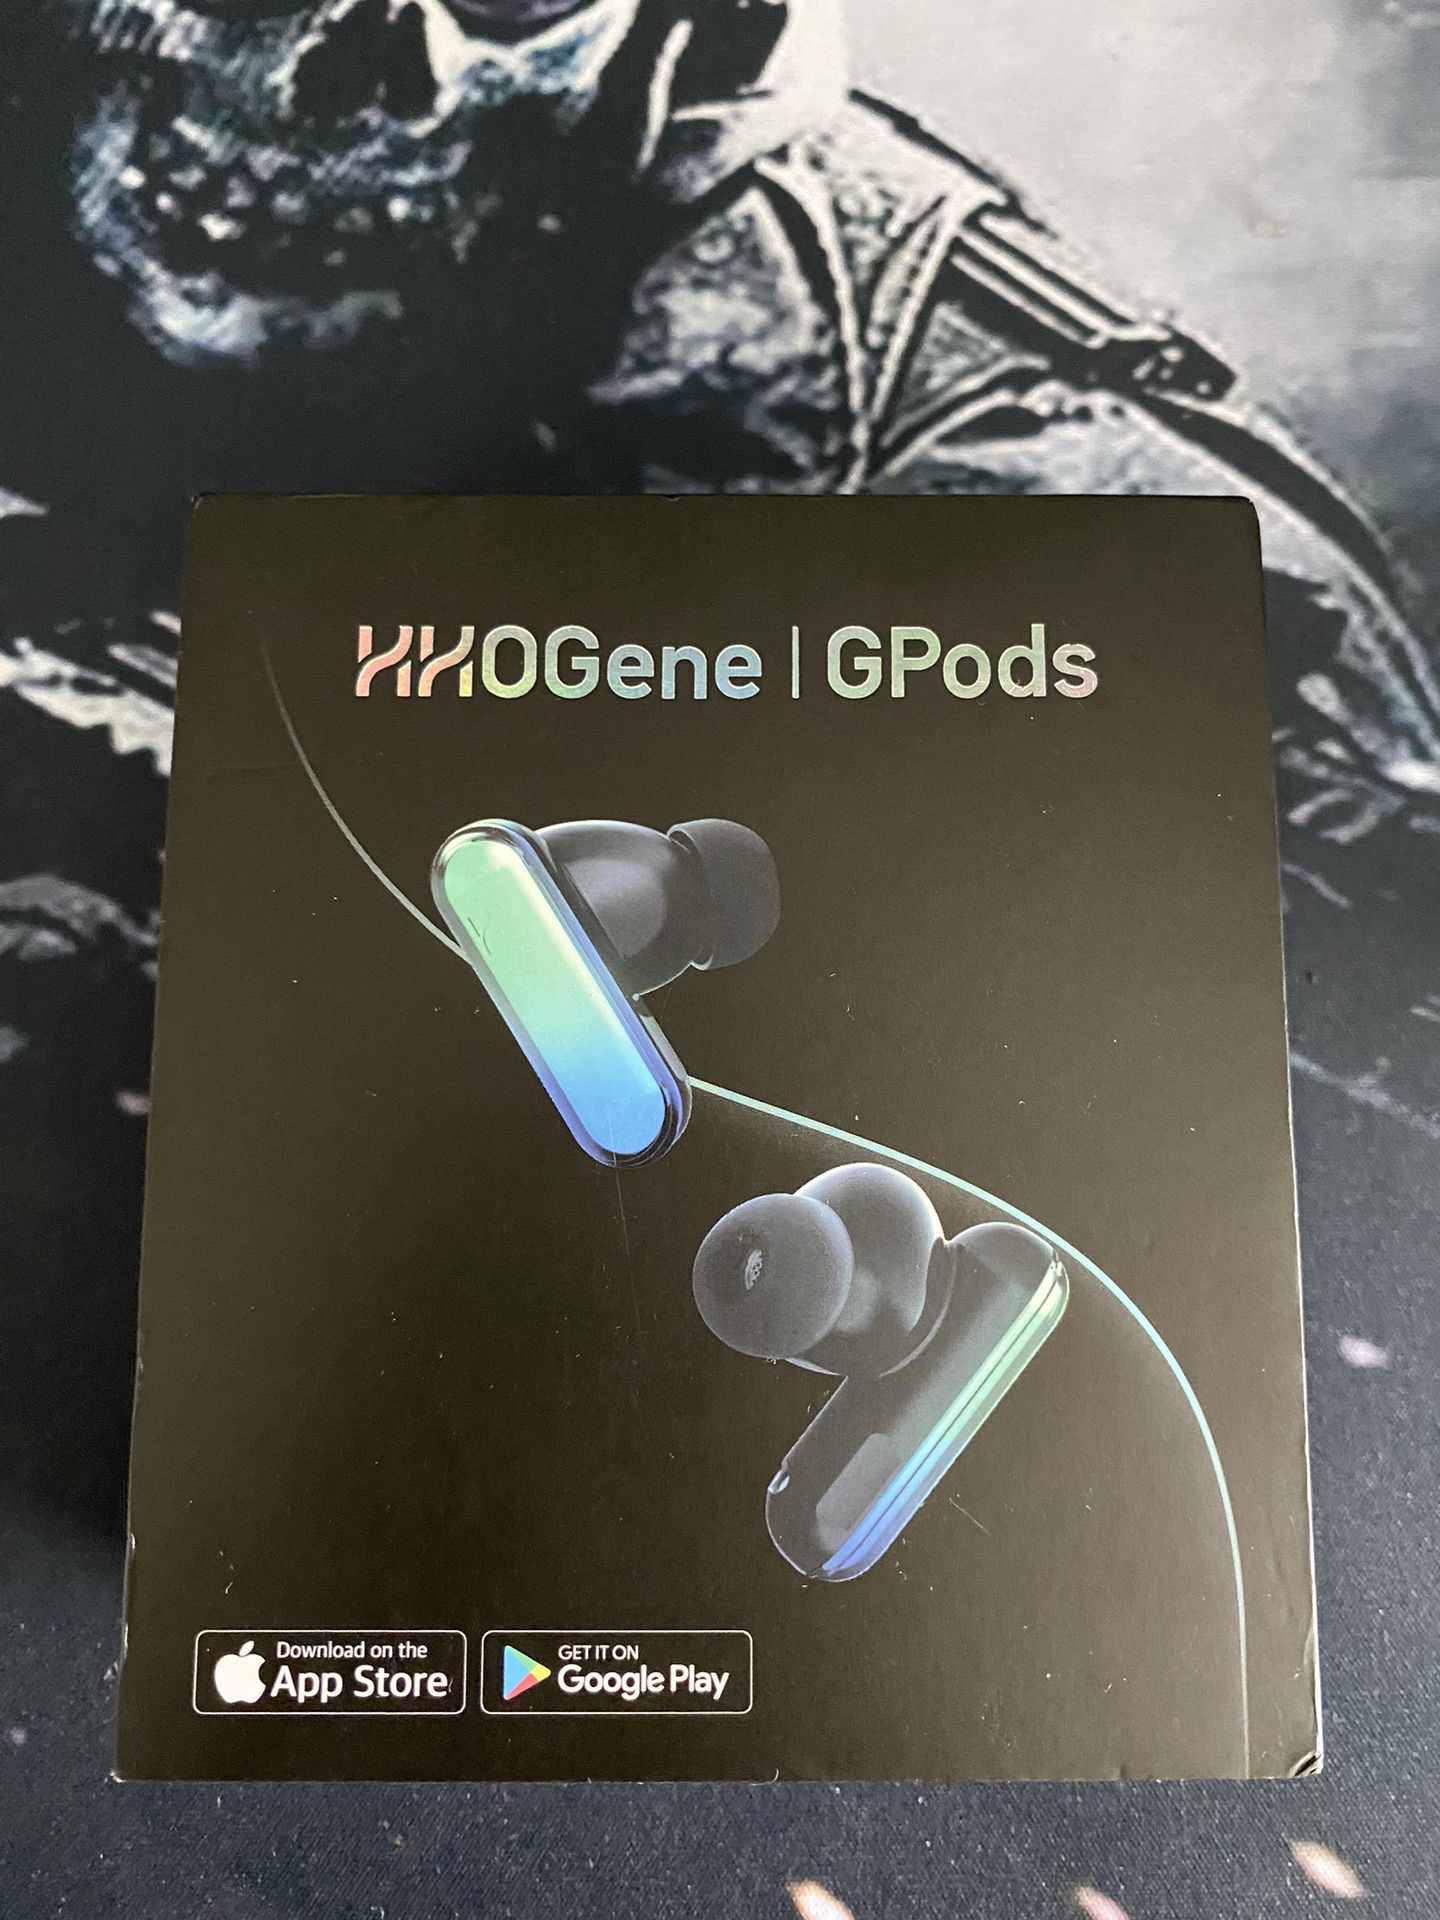 HHOGene Gpods RGB Wireless Earbuds with Led Light Control